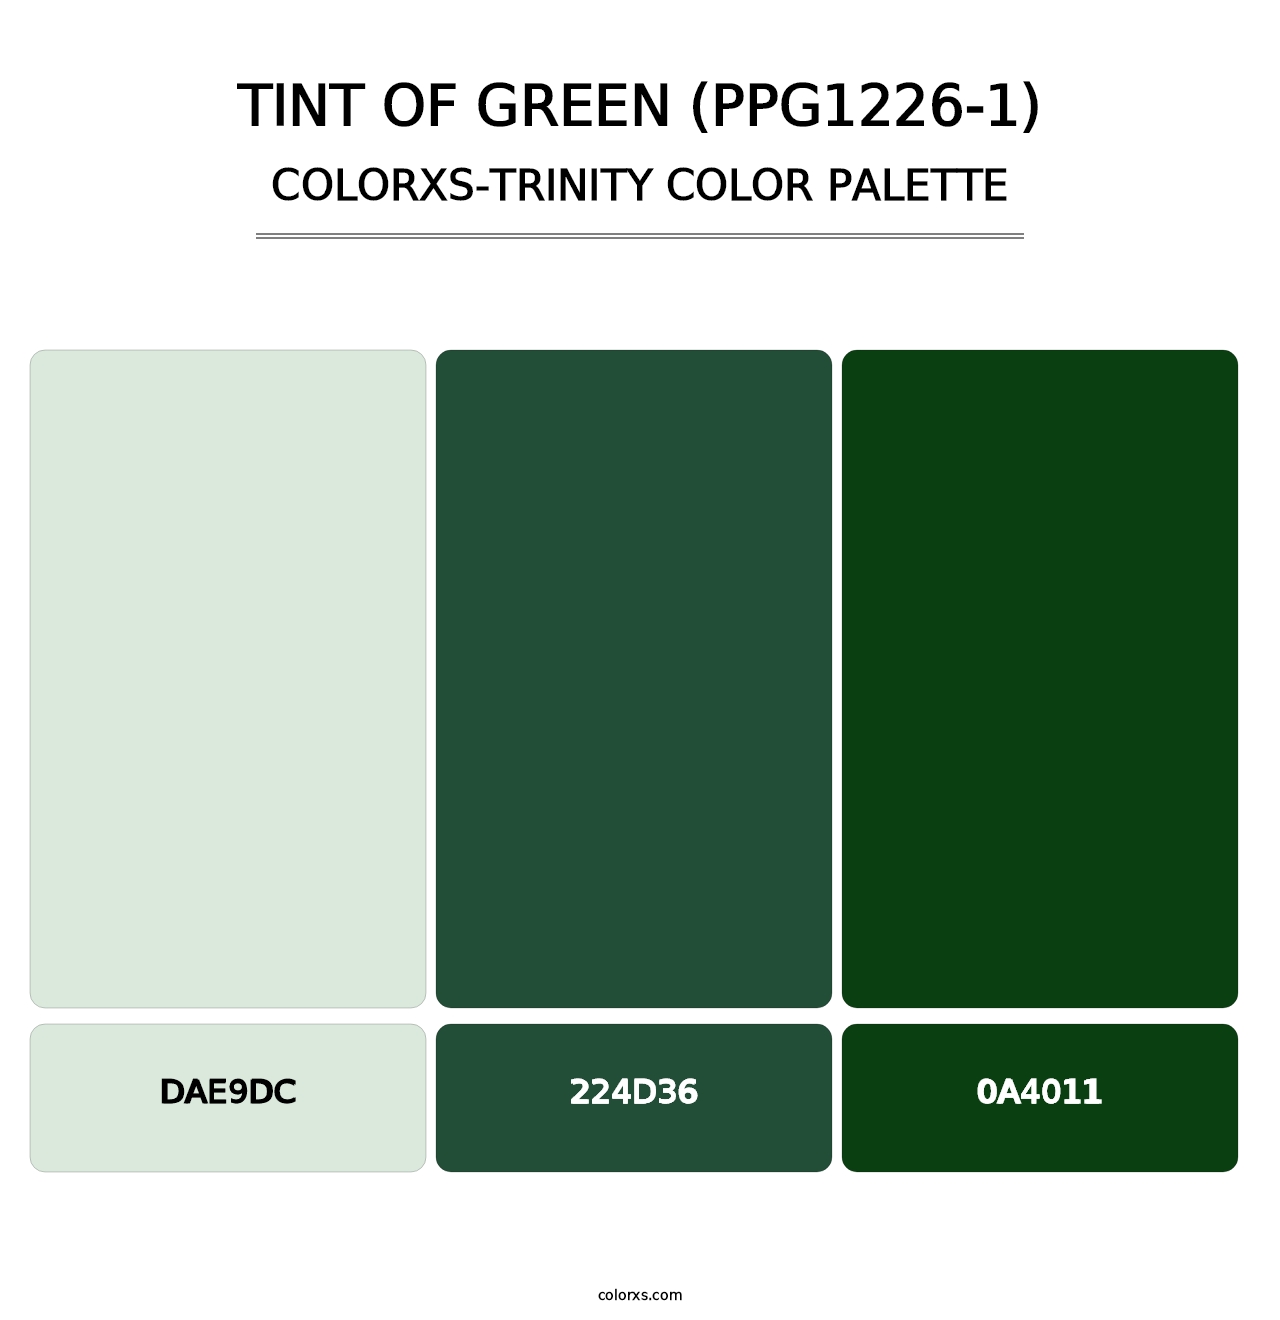 Tint Of Green (PPG1226-1) - Colorxs Trinity Palette